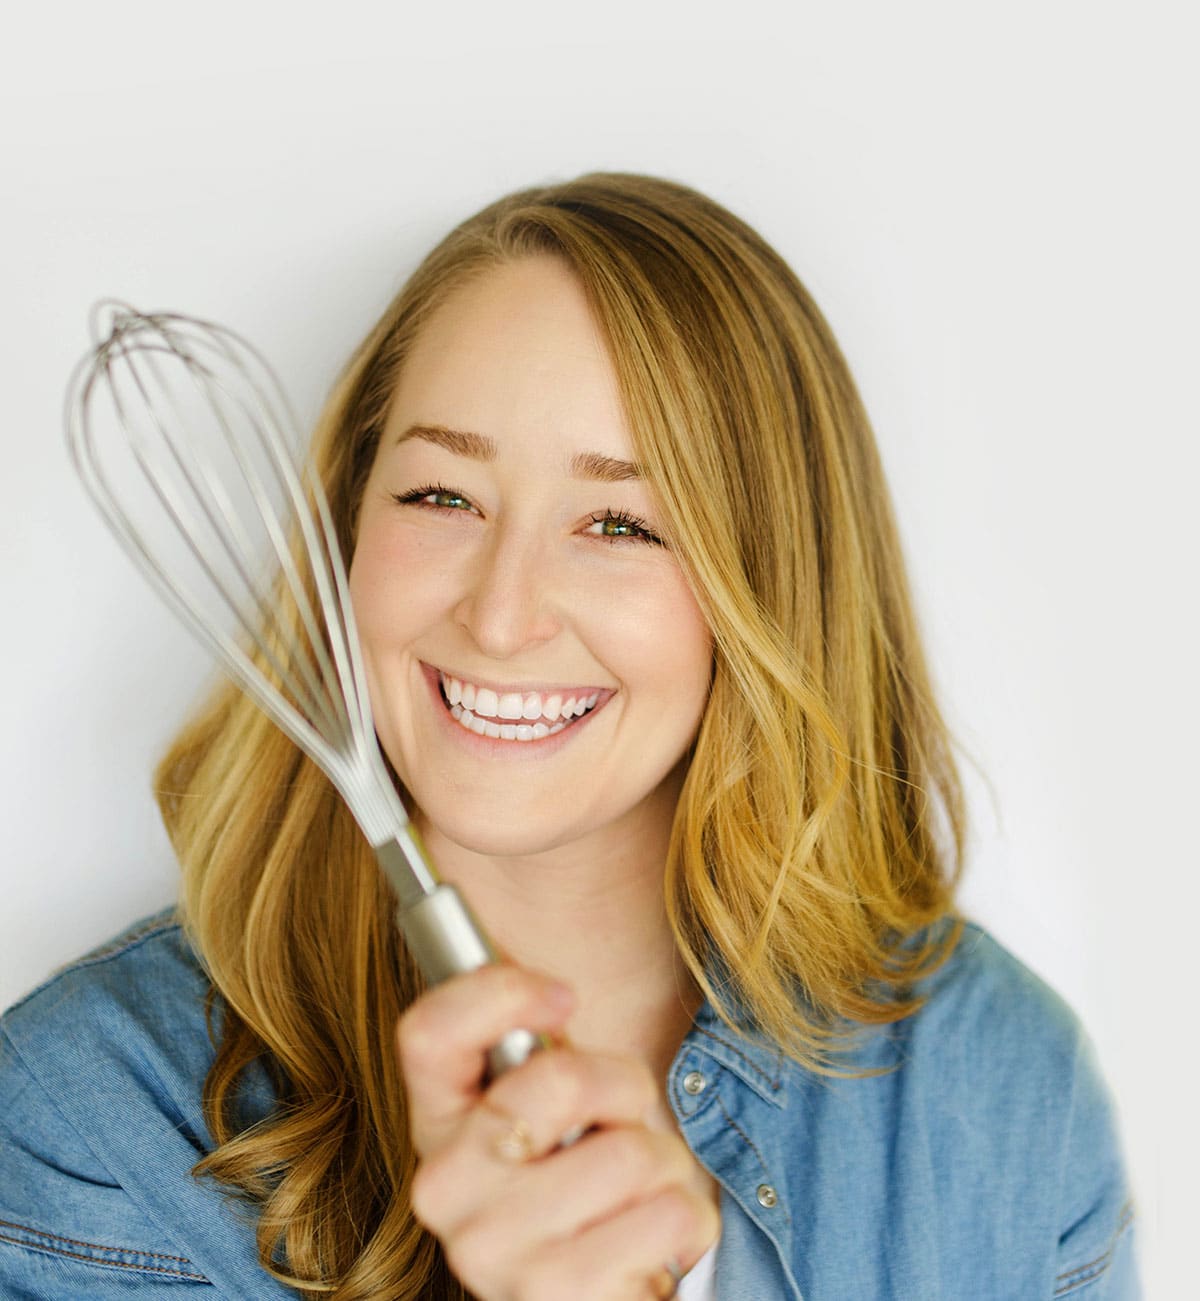 Sarah Bond of Live Eat Learn with whisk.